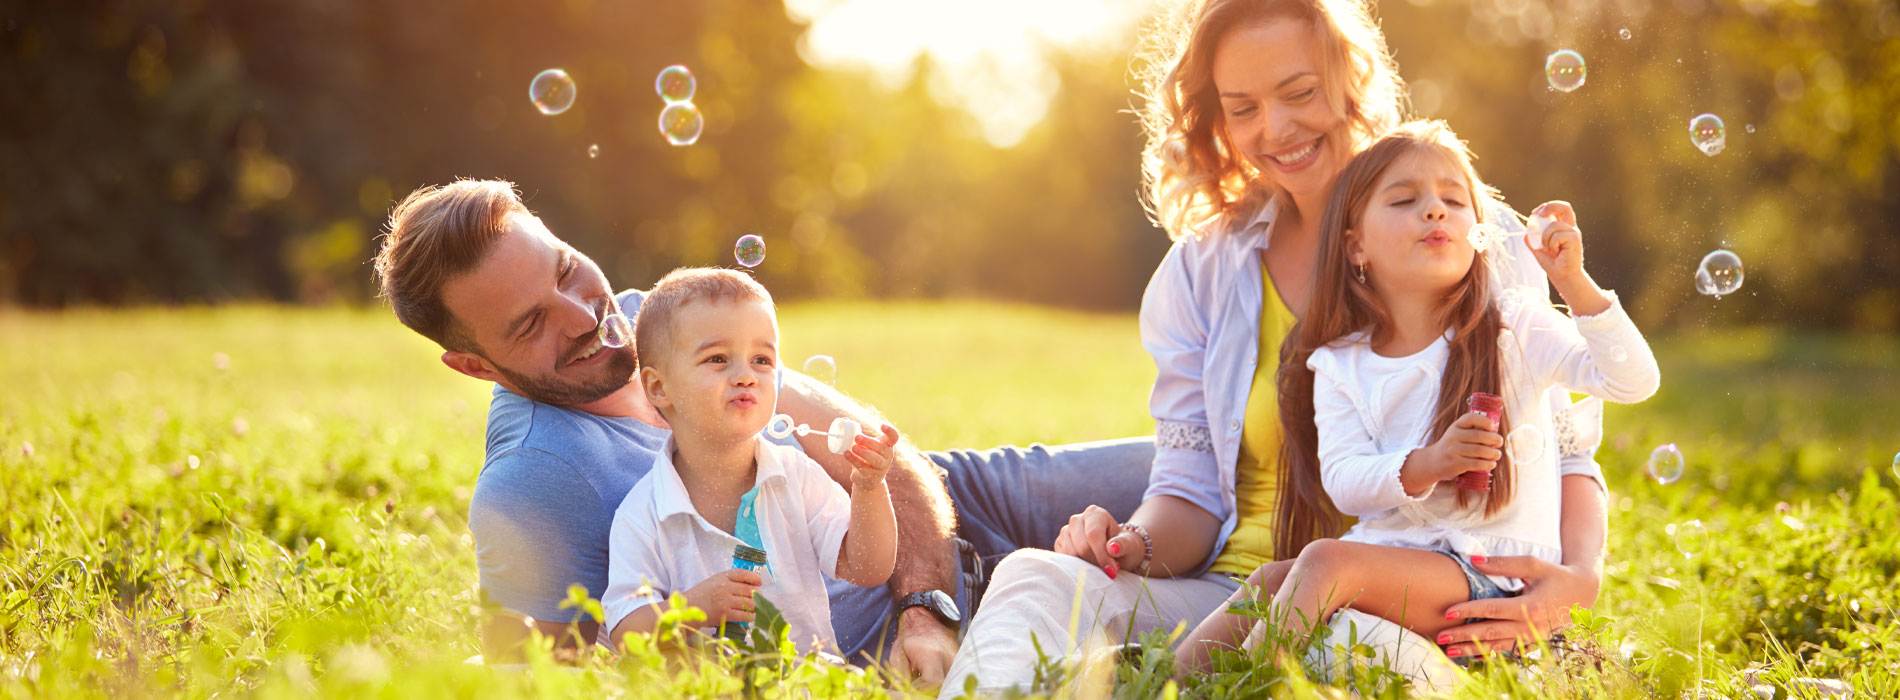 Banner picture of a couple with their son and daughter sitting and lying down in a grass field. The children are blowing bubbles and their parents are smiling.